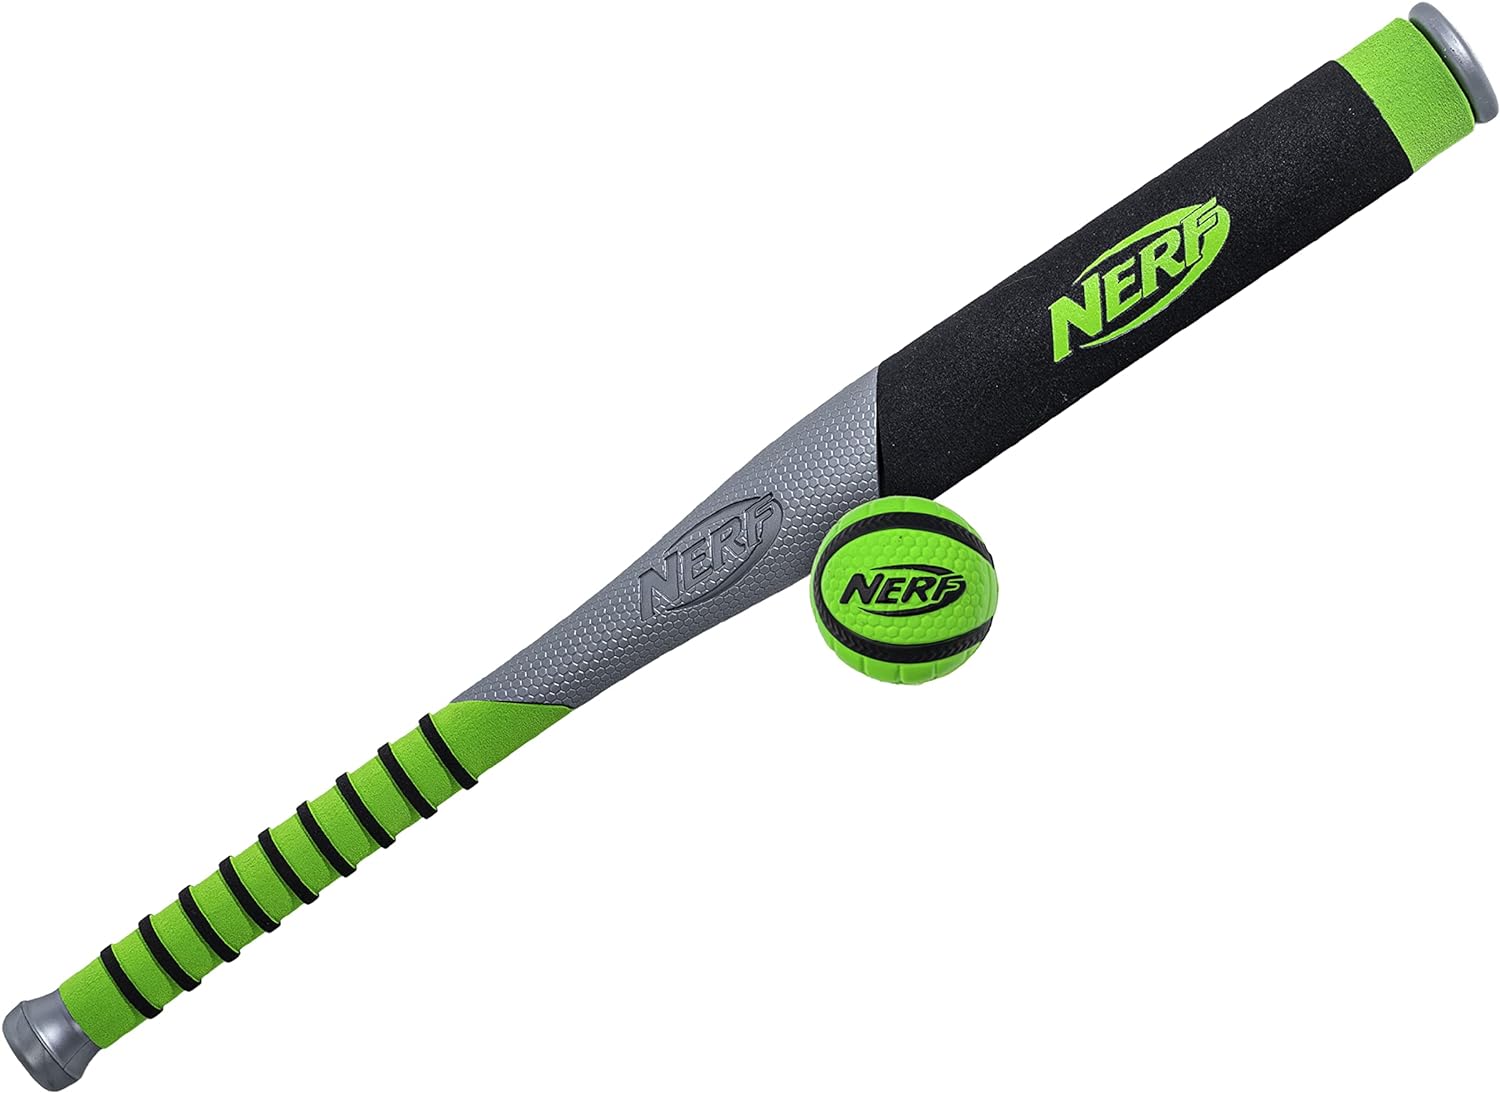 I got to set for my younger grandkids. Its lightweight and much less dangerous than a true bat for big kids. The Nerf set is unique. It has a soft foam handle with raised pieces of foam for gripping. The bat itself is a combination of plastic and more foam. Its easy to swing and long. It comes with a single ball that is a covered foam. I like that the ball is brightly colored so its easy to spot in the grass.This is a set that is great to have outside for the grandkids for playtime.